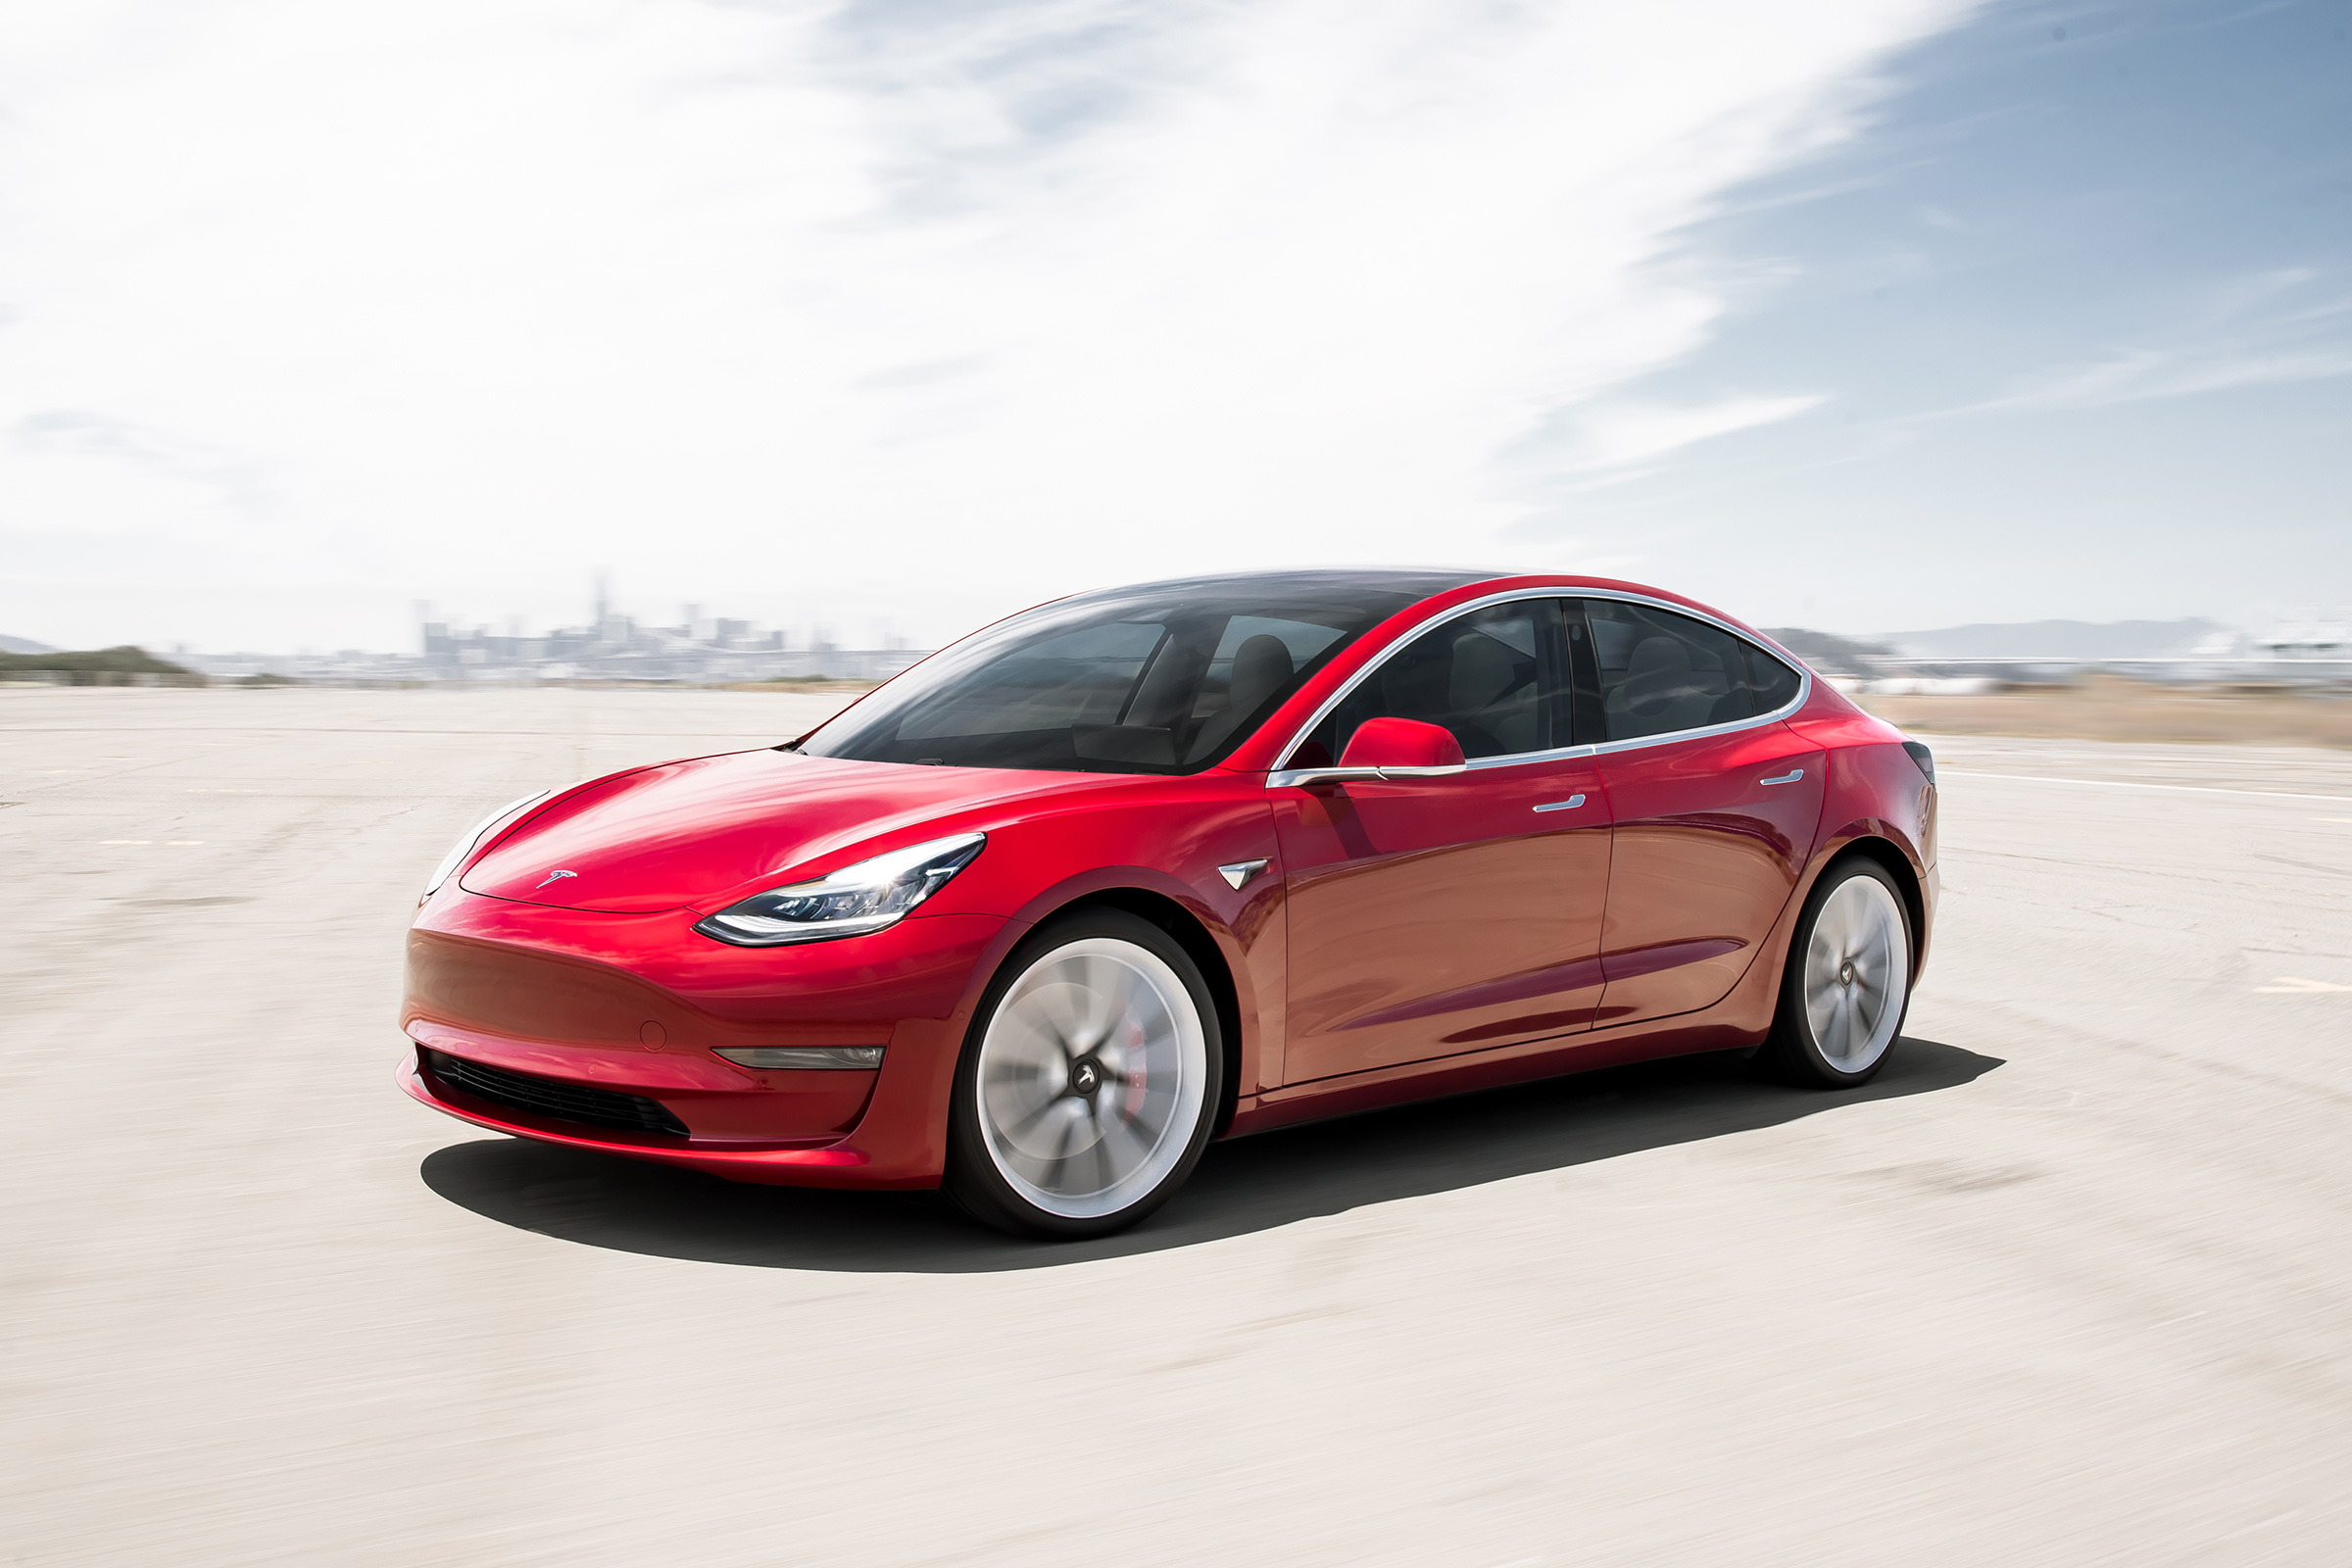 Tesla Model 3: specs, prices and full details on the all-electric